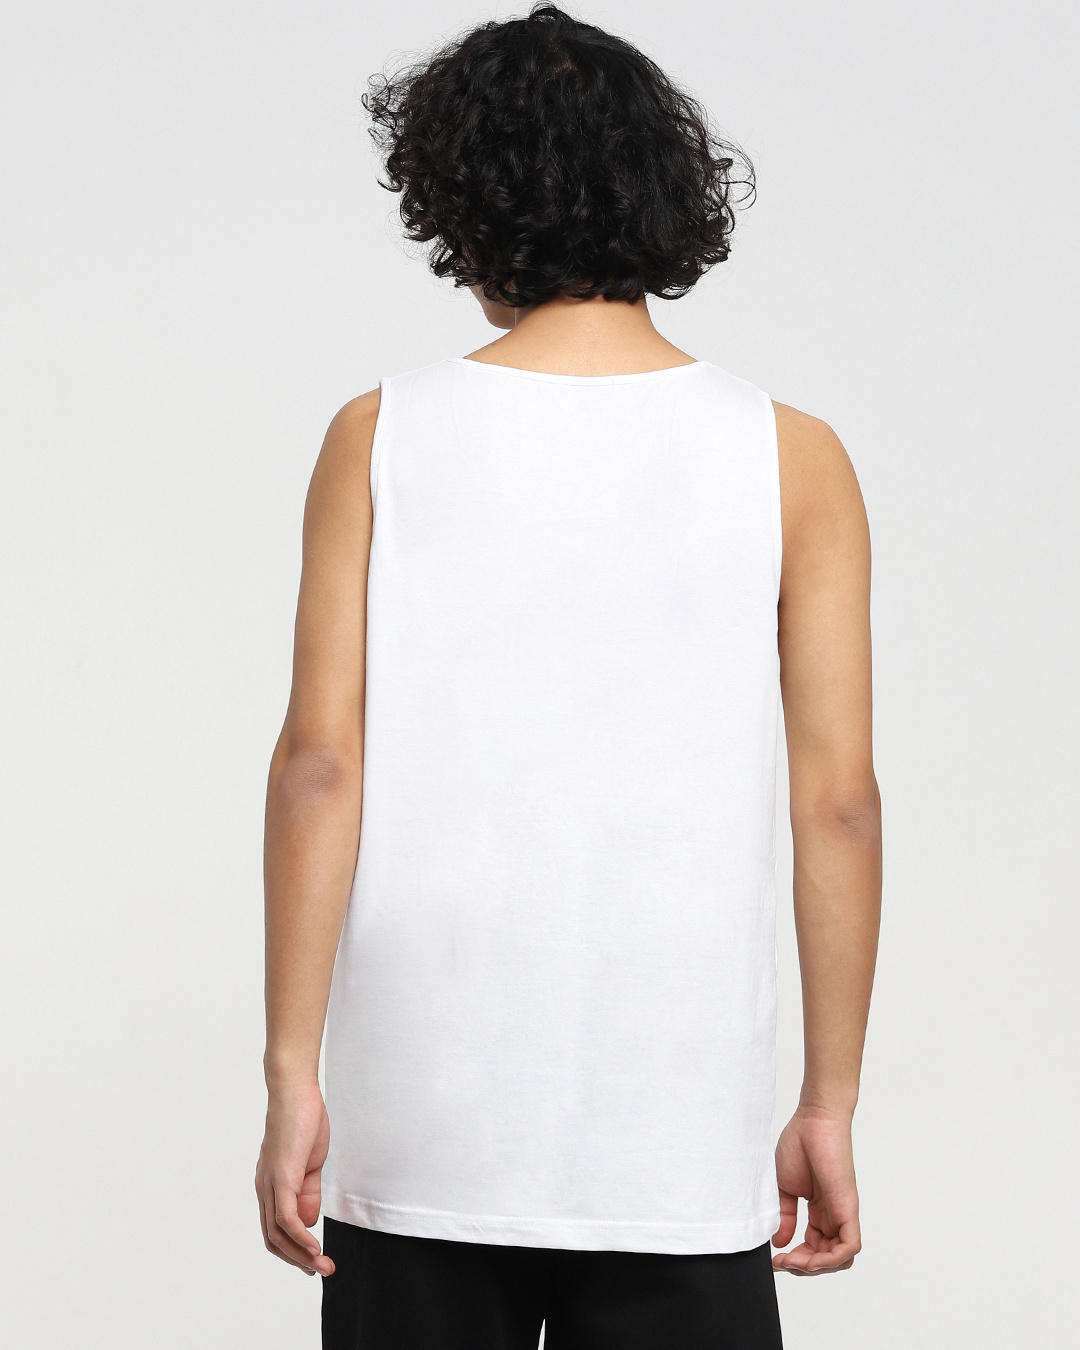 Shop Men's White List of Things Typography Vest-Back